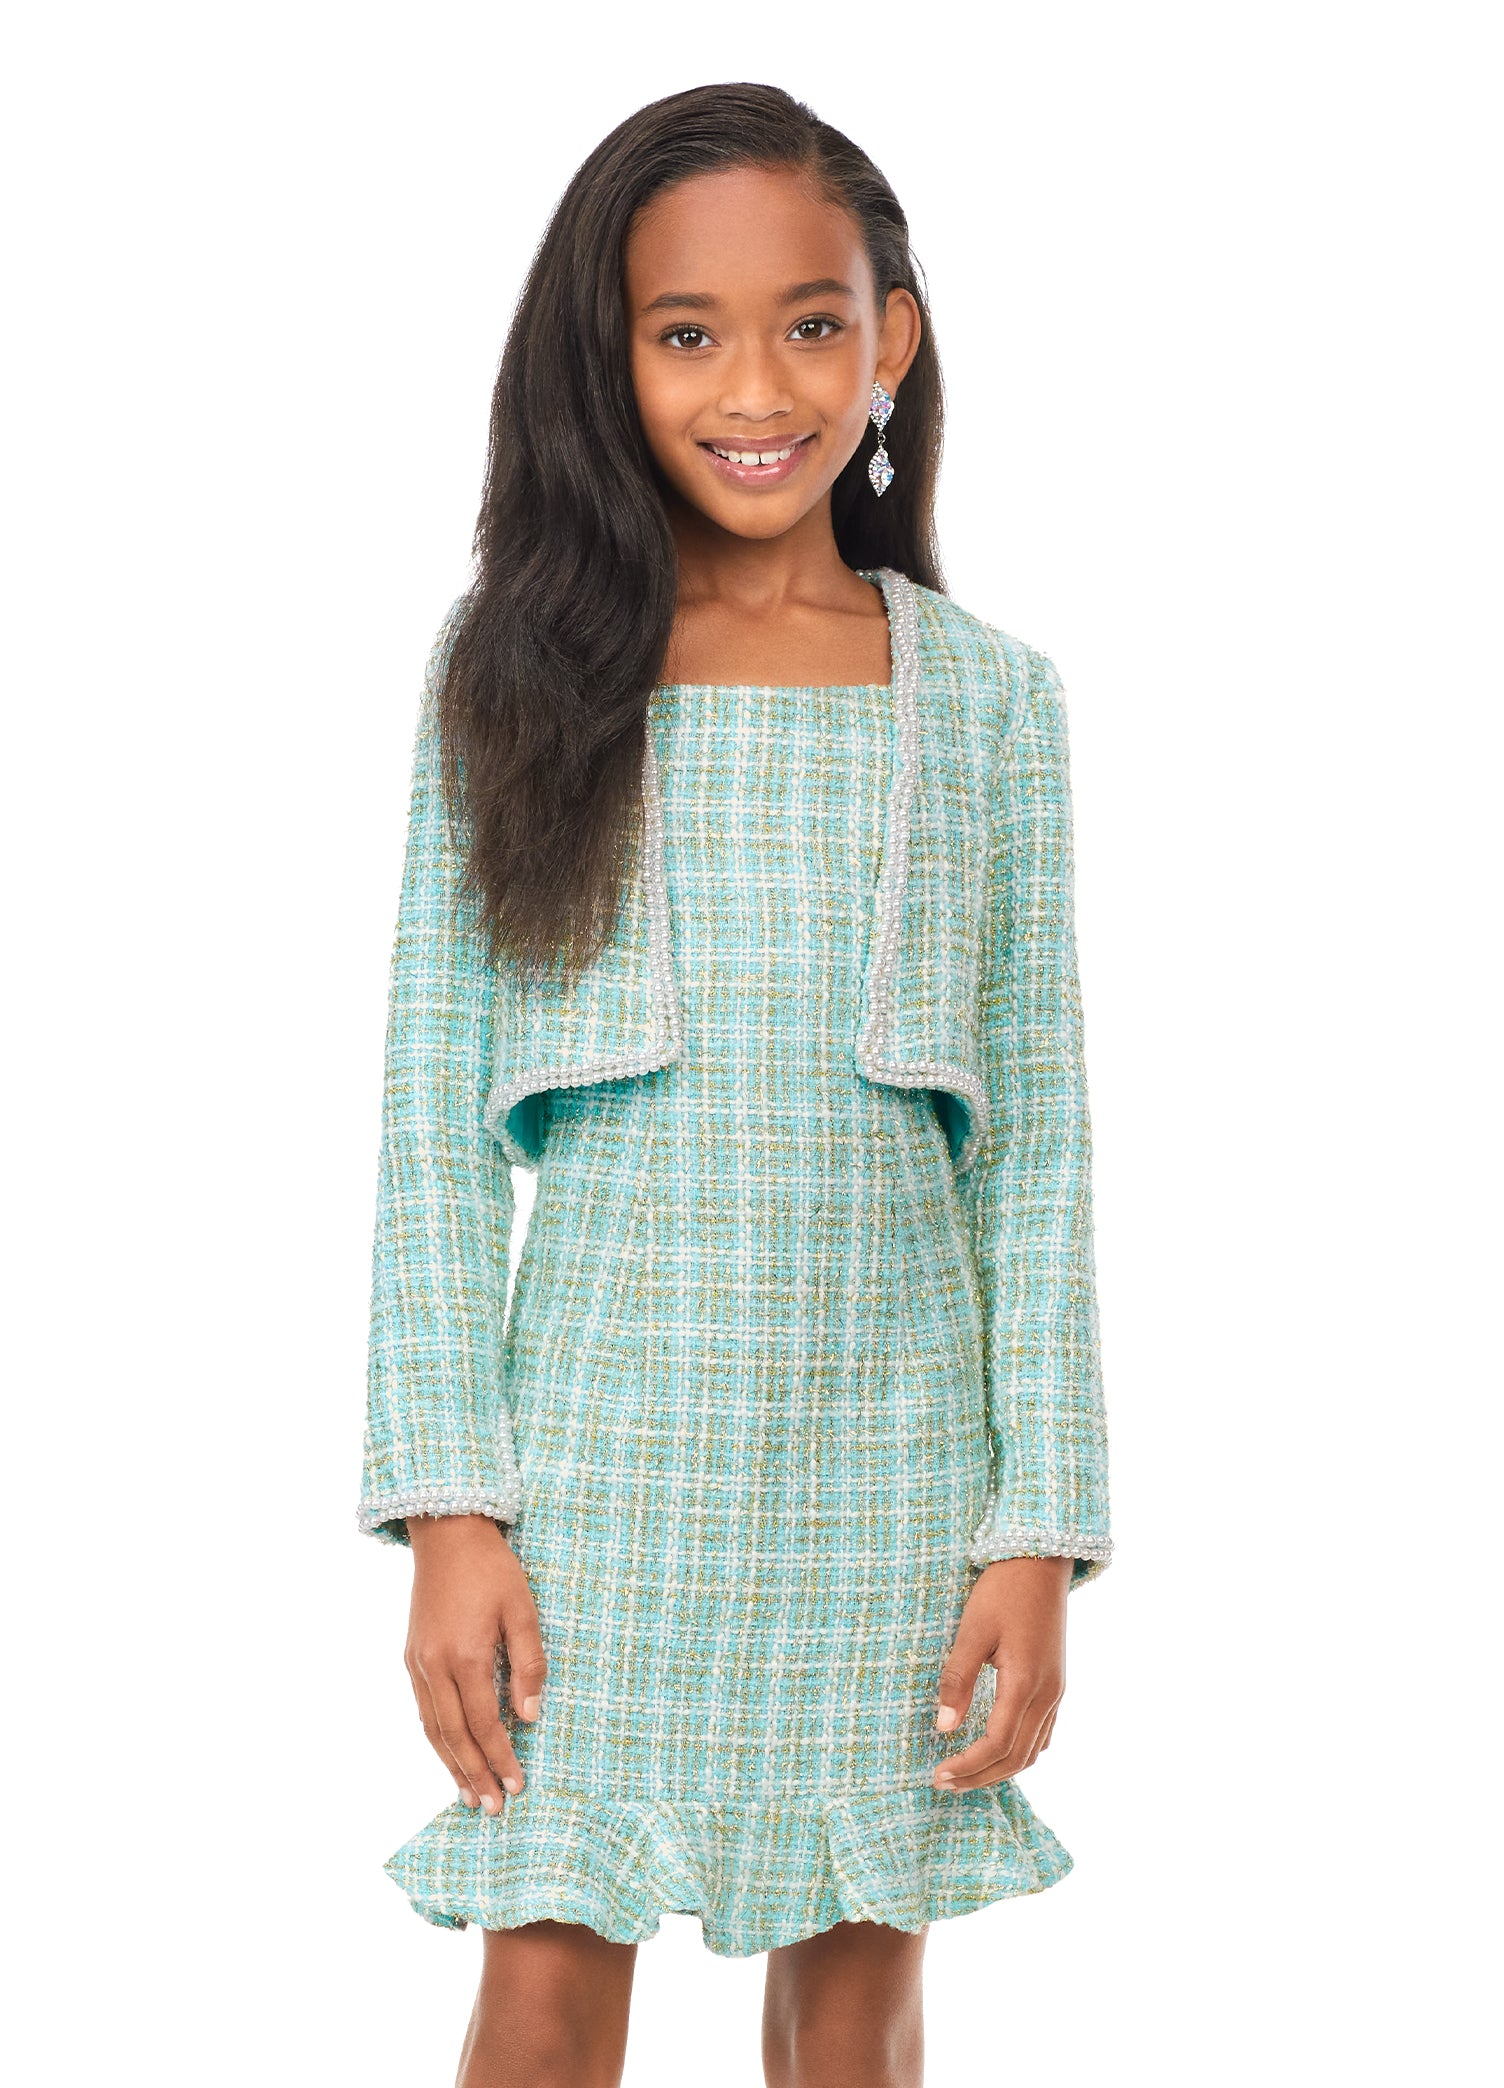 Ashley Lauren 8173 Kids Aqua Tweed Cocktail Dress with Jacket  This gorgeous tweed dress features a crew neckline with fitted skirt. The skirt is complete with a ruffle hemline. The stunning jacket is trimmed in pearls to complete the look.